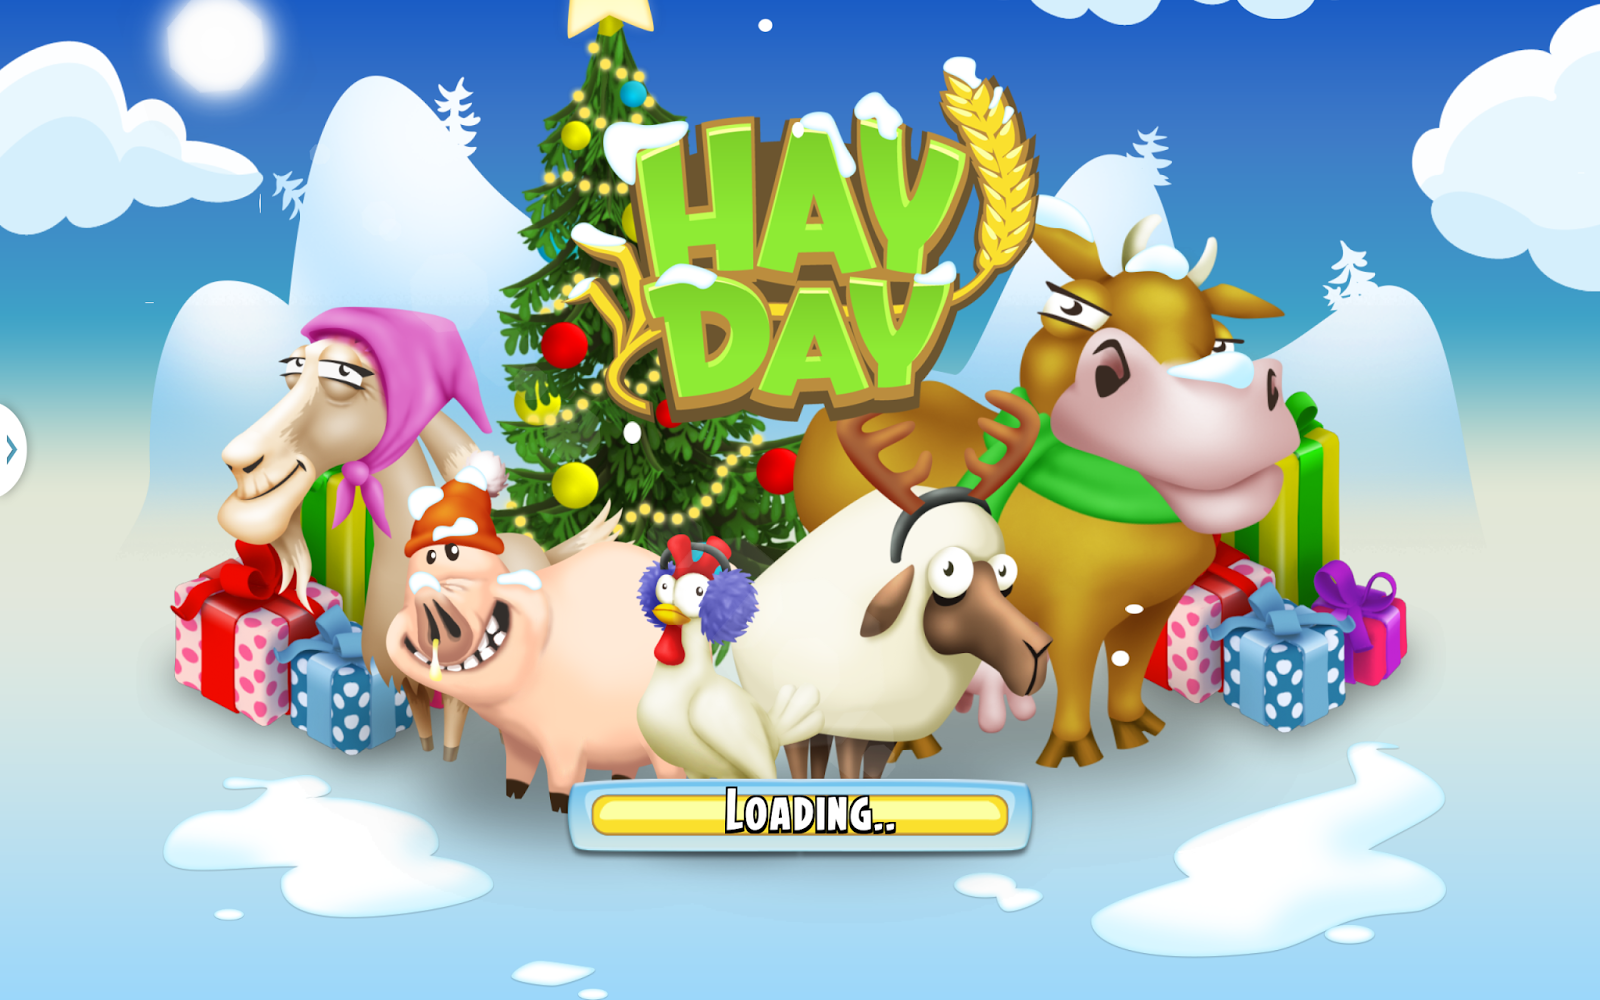 [Review] Hay day | Just An Ordinary Girl